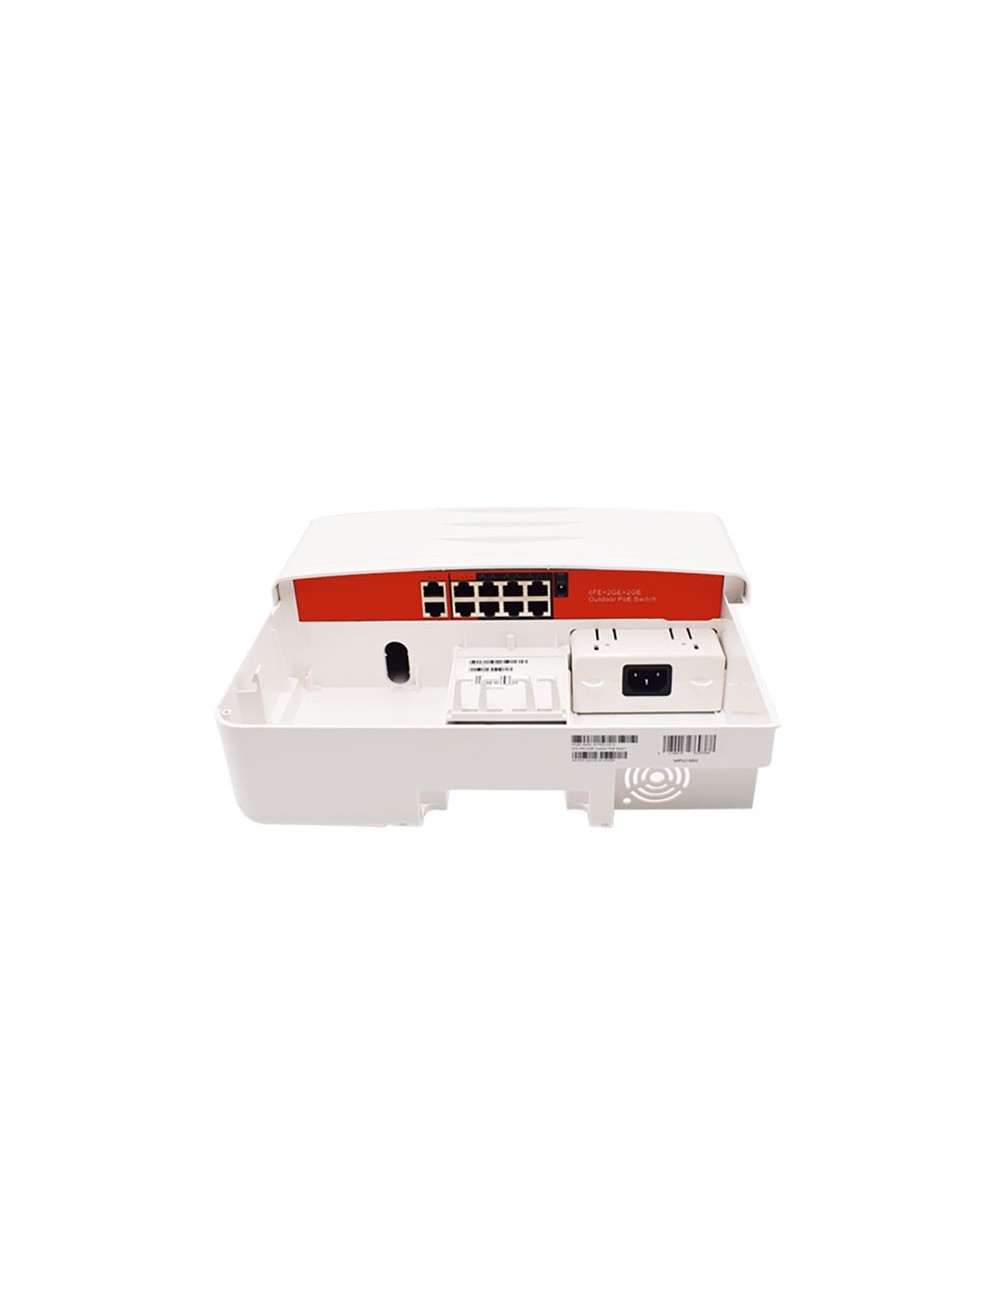 Outdoor switch 10 ports - 8 ports PoE